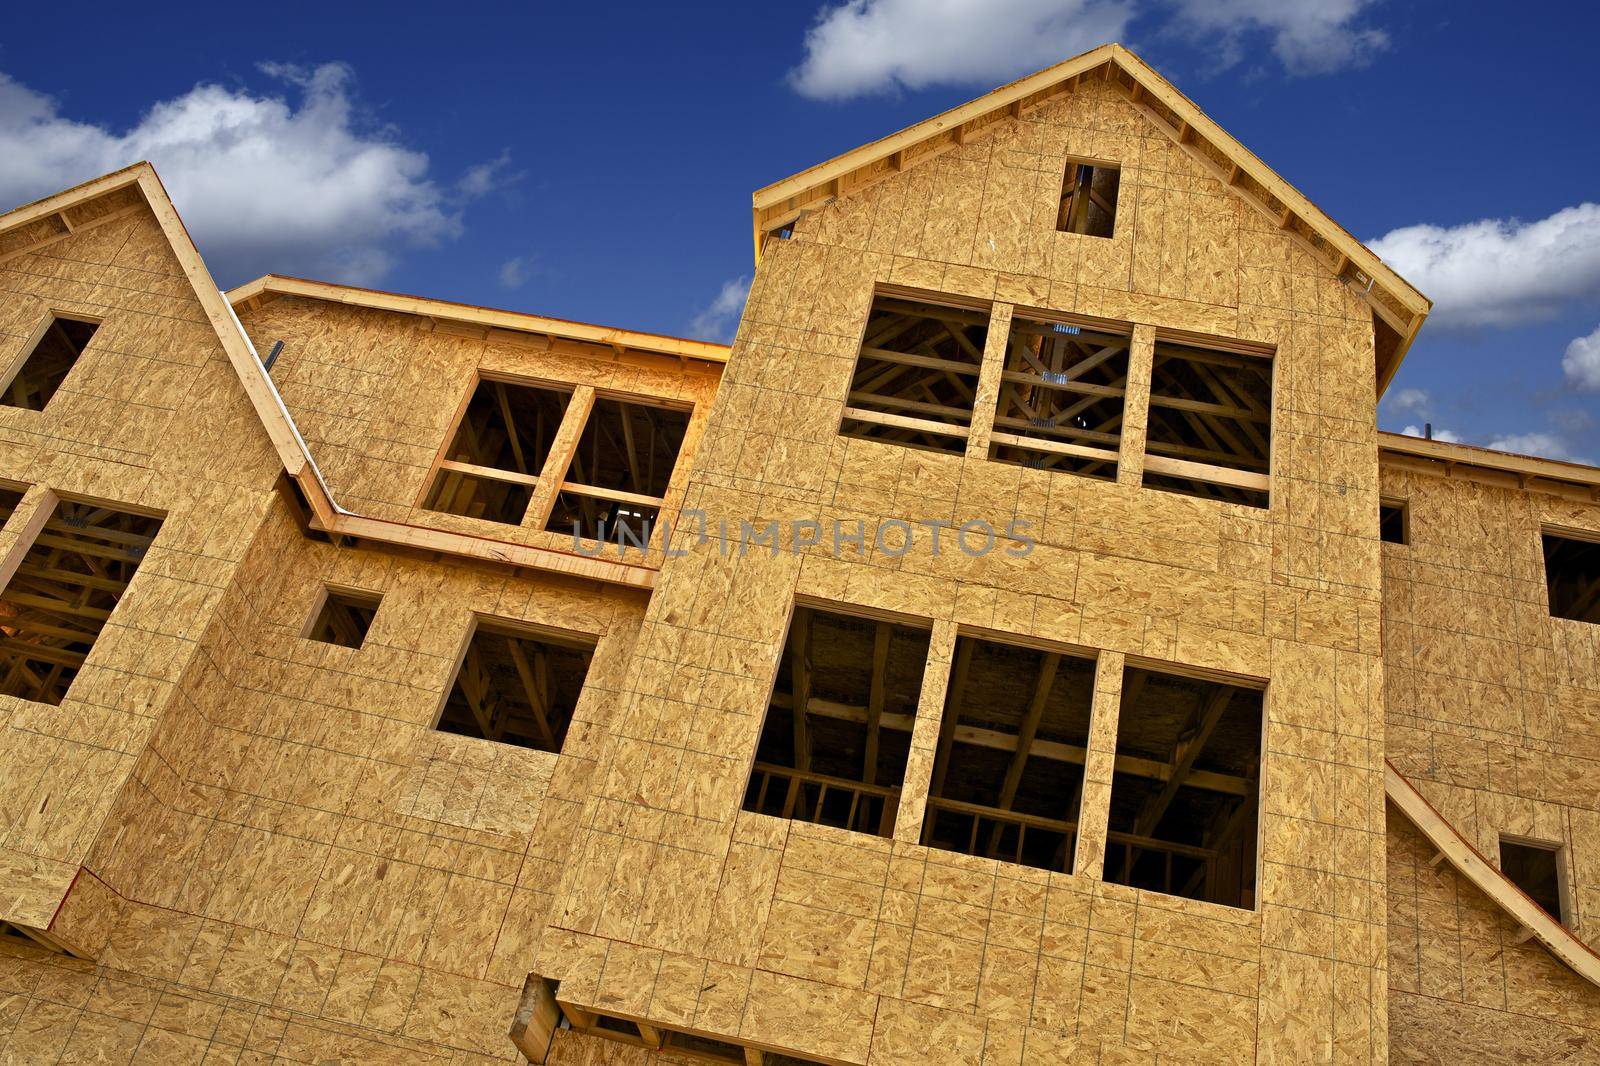 Construction Business. New Town Homes Under Construction. Construction Photo Collection.